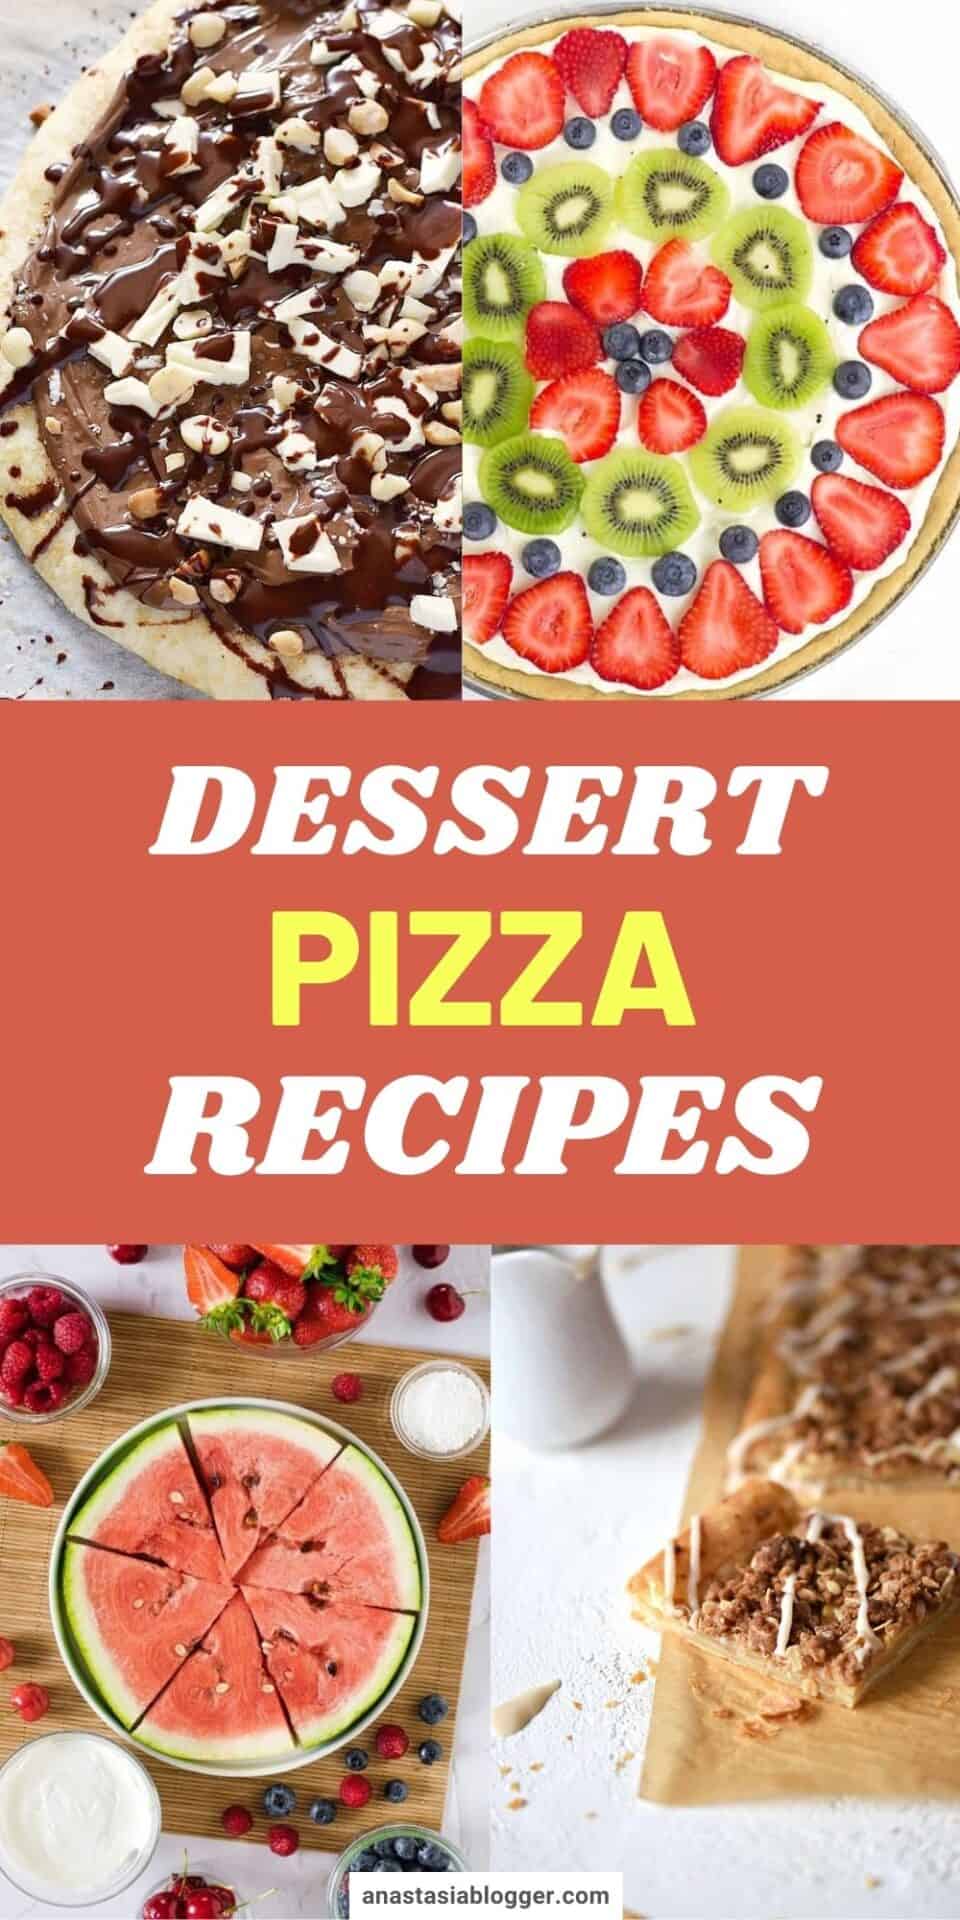 15 Amazing Dessert Pizza Recipes For The Summer